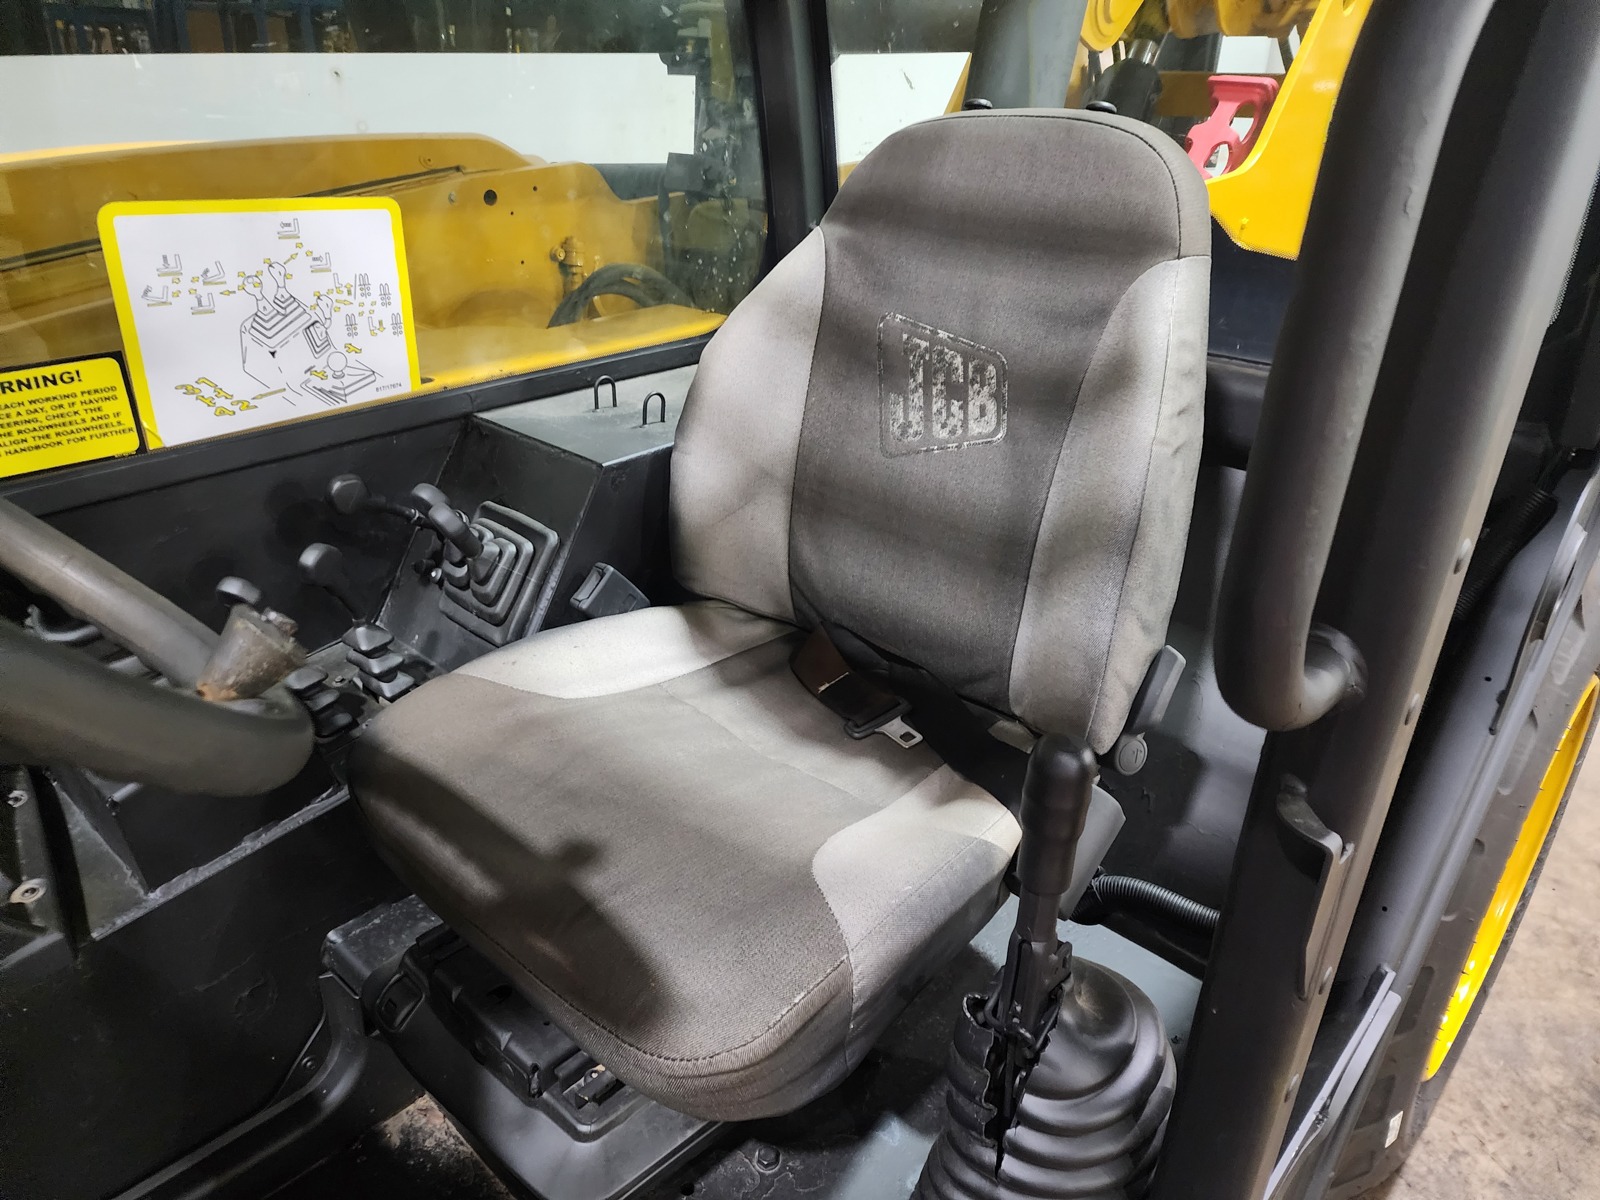 Used 2012 JCB 510-56  | Cary, IL